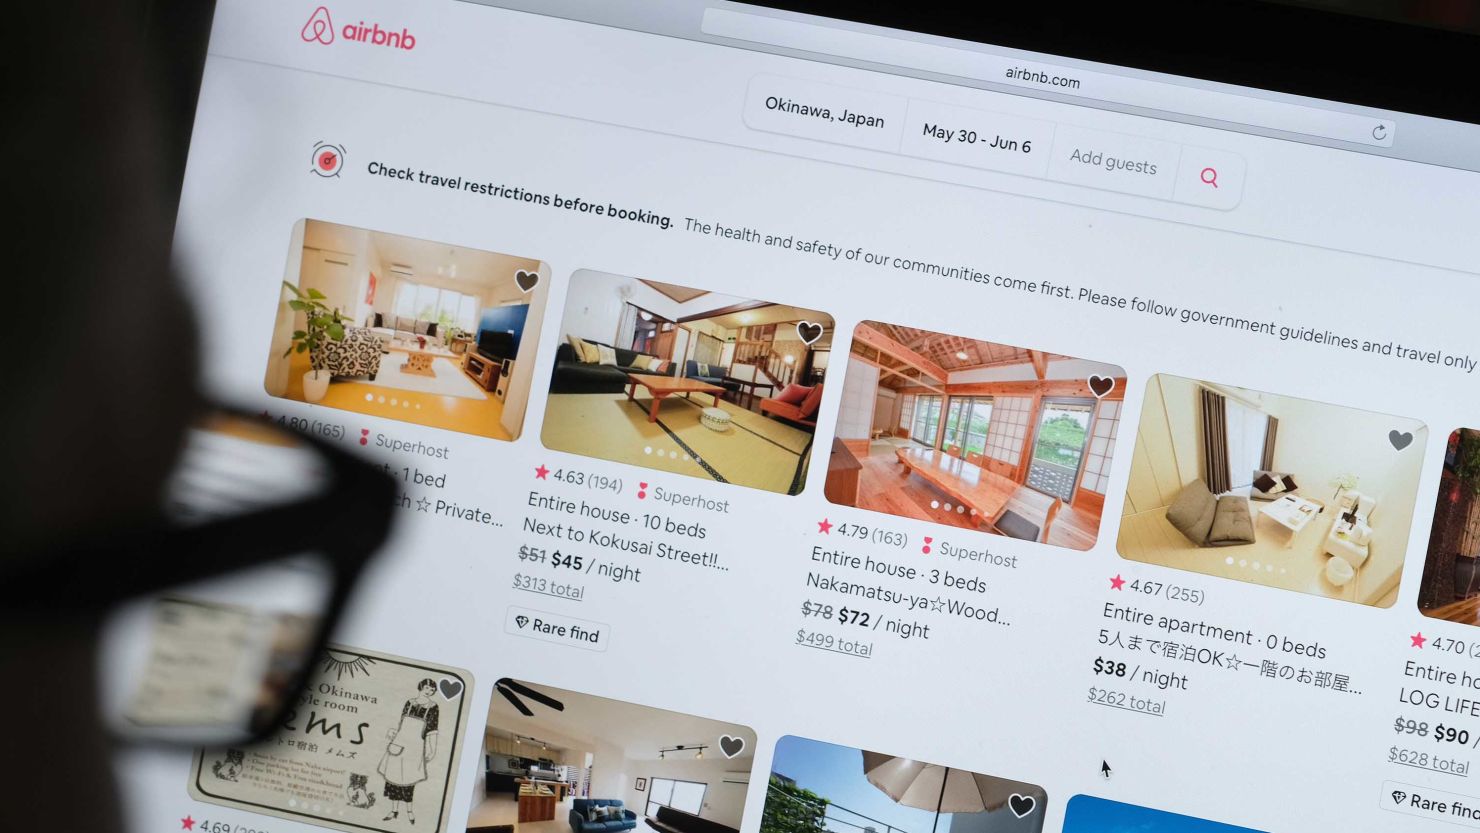 KATWIJK, NETHERLANDS - APRIL 20: In this photo illustration, a man looks at the website of Airbnb on April 20, 2020 in Katwijk, Netherlands.  (Photo by Yuriko Nakao/Getty Images)